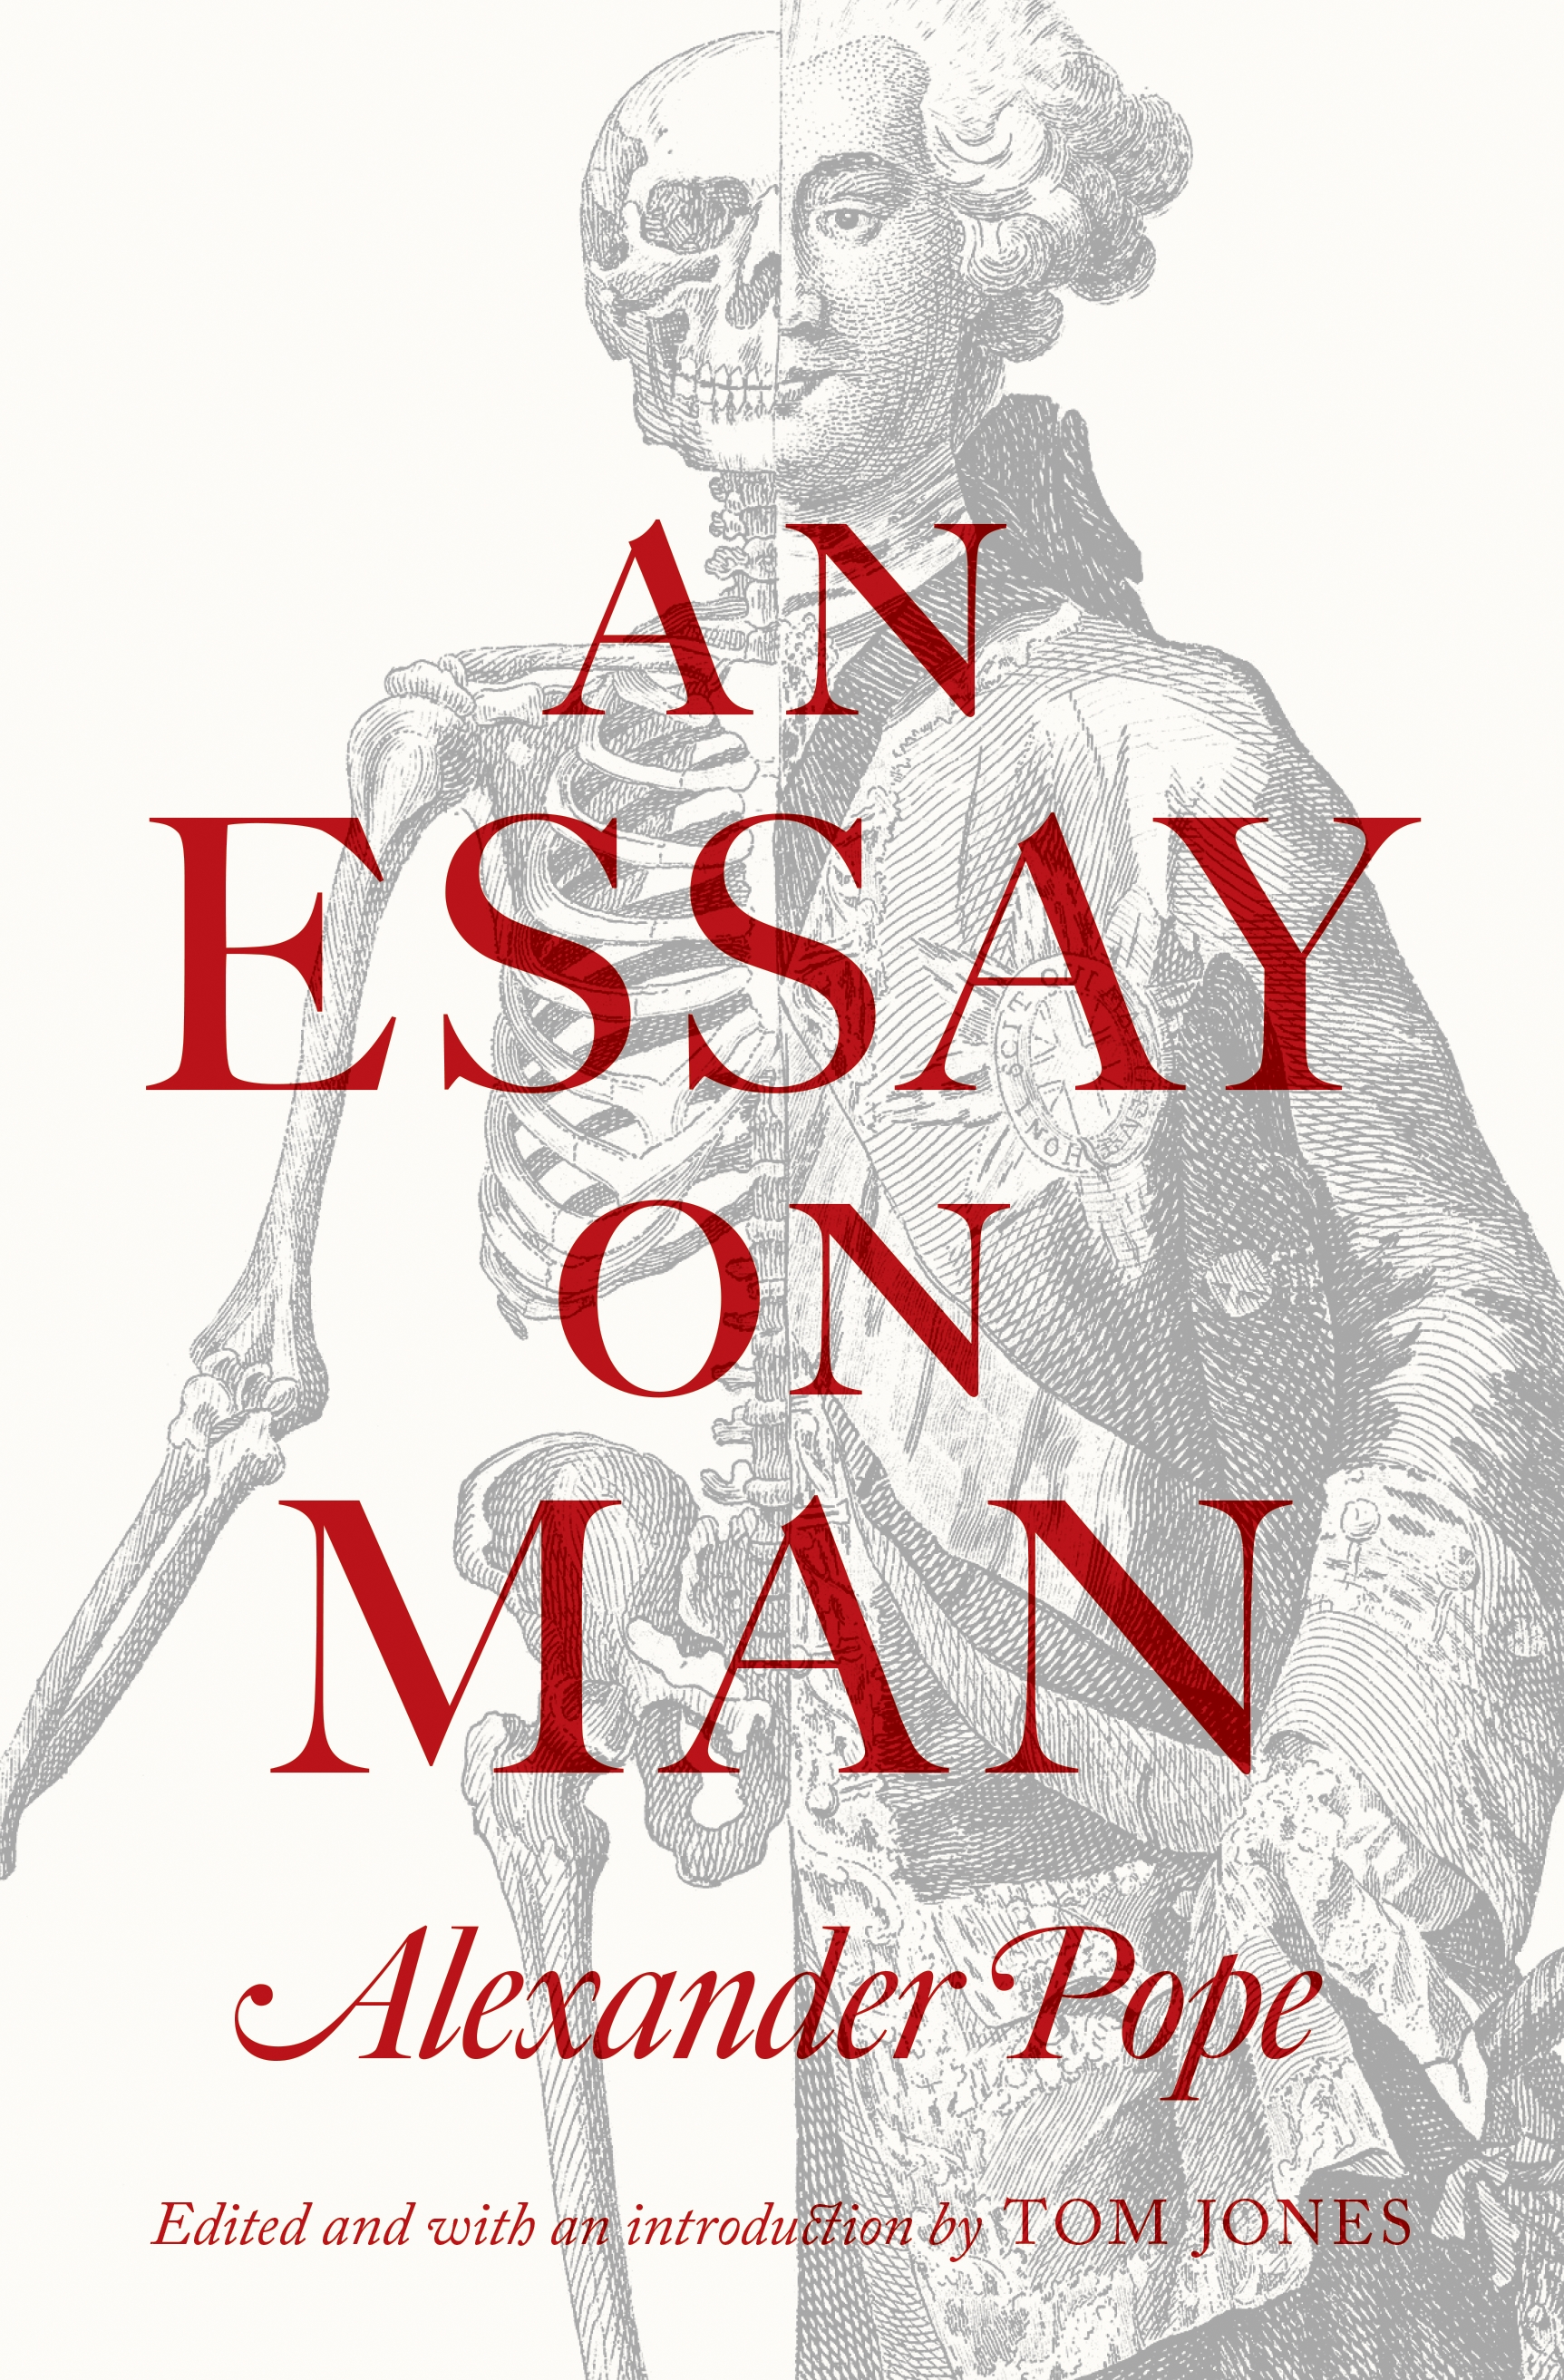 what is essay on man about